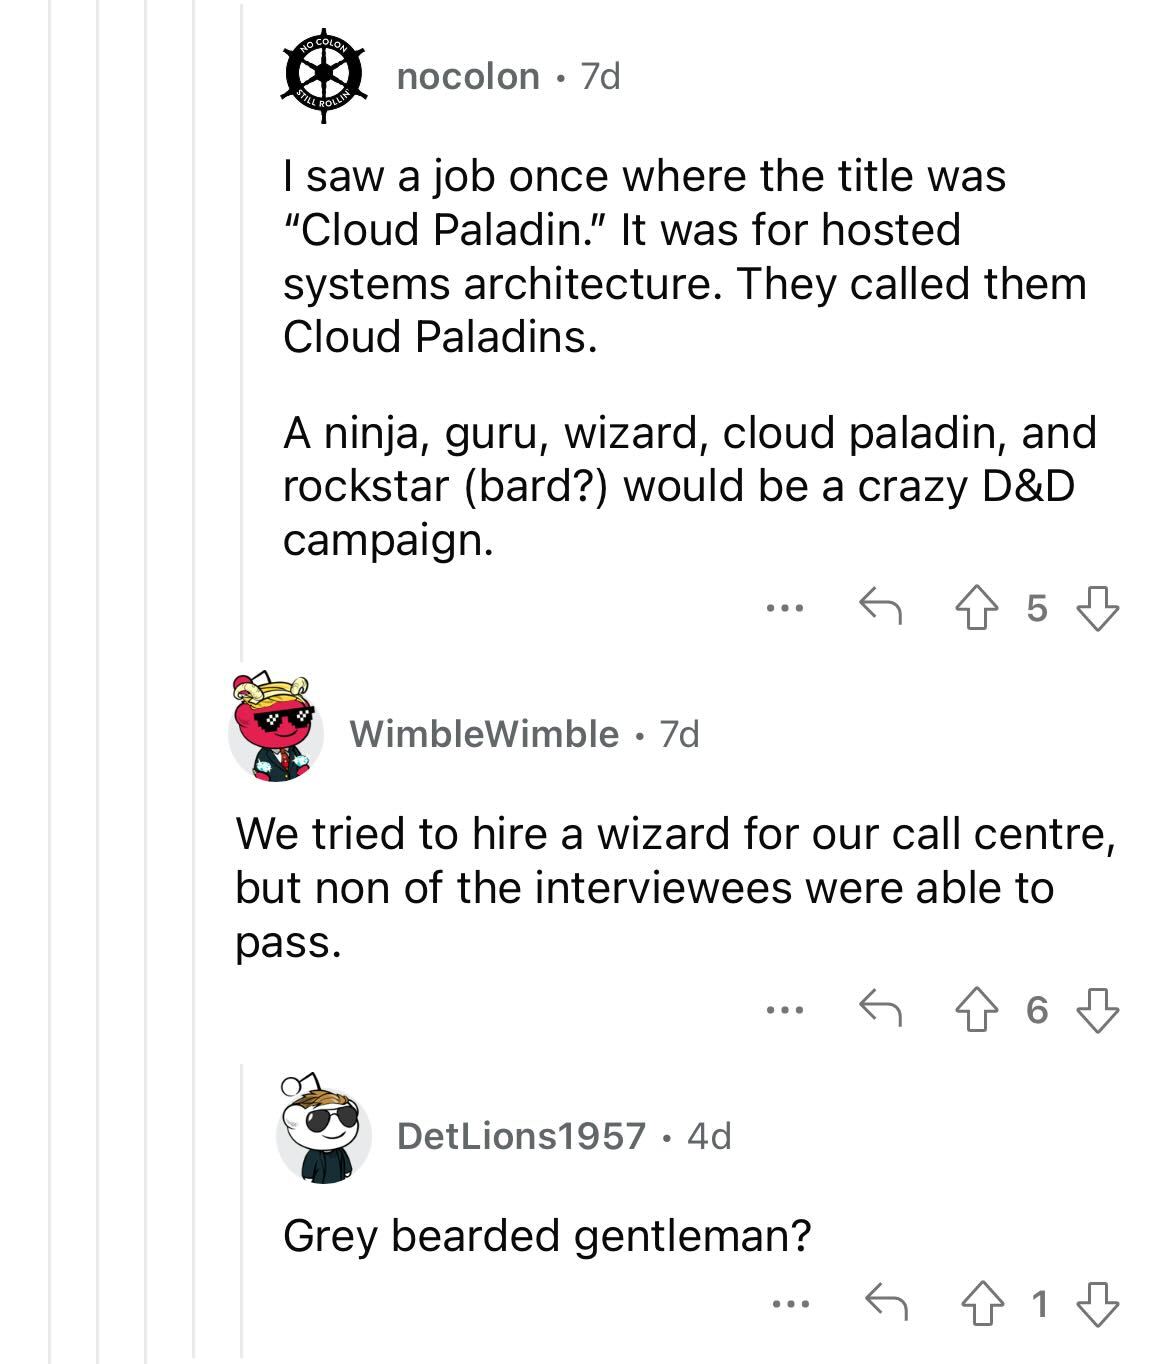 job posting red flags you should avoid - angle - O Colon Will Rollin nocolon 7d I saw a job once where the title was "Cloud Paladin." It was for hosted systems architecture. They called them Cloud Paladins. A ninja, guru, wizard, cloud paladin, and rockst